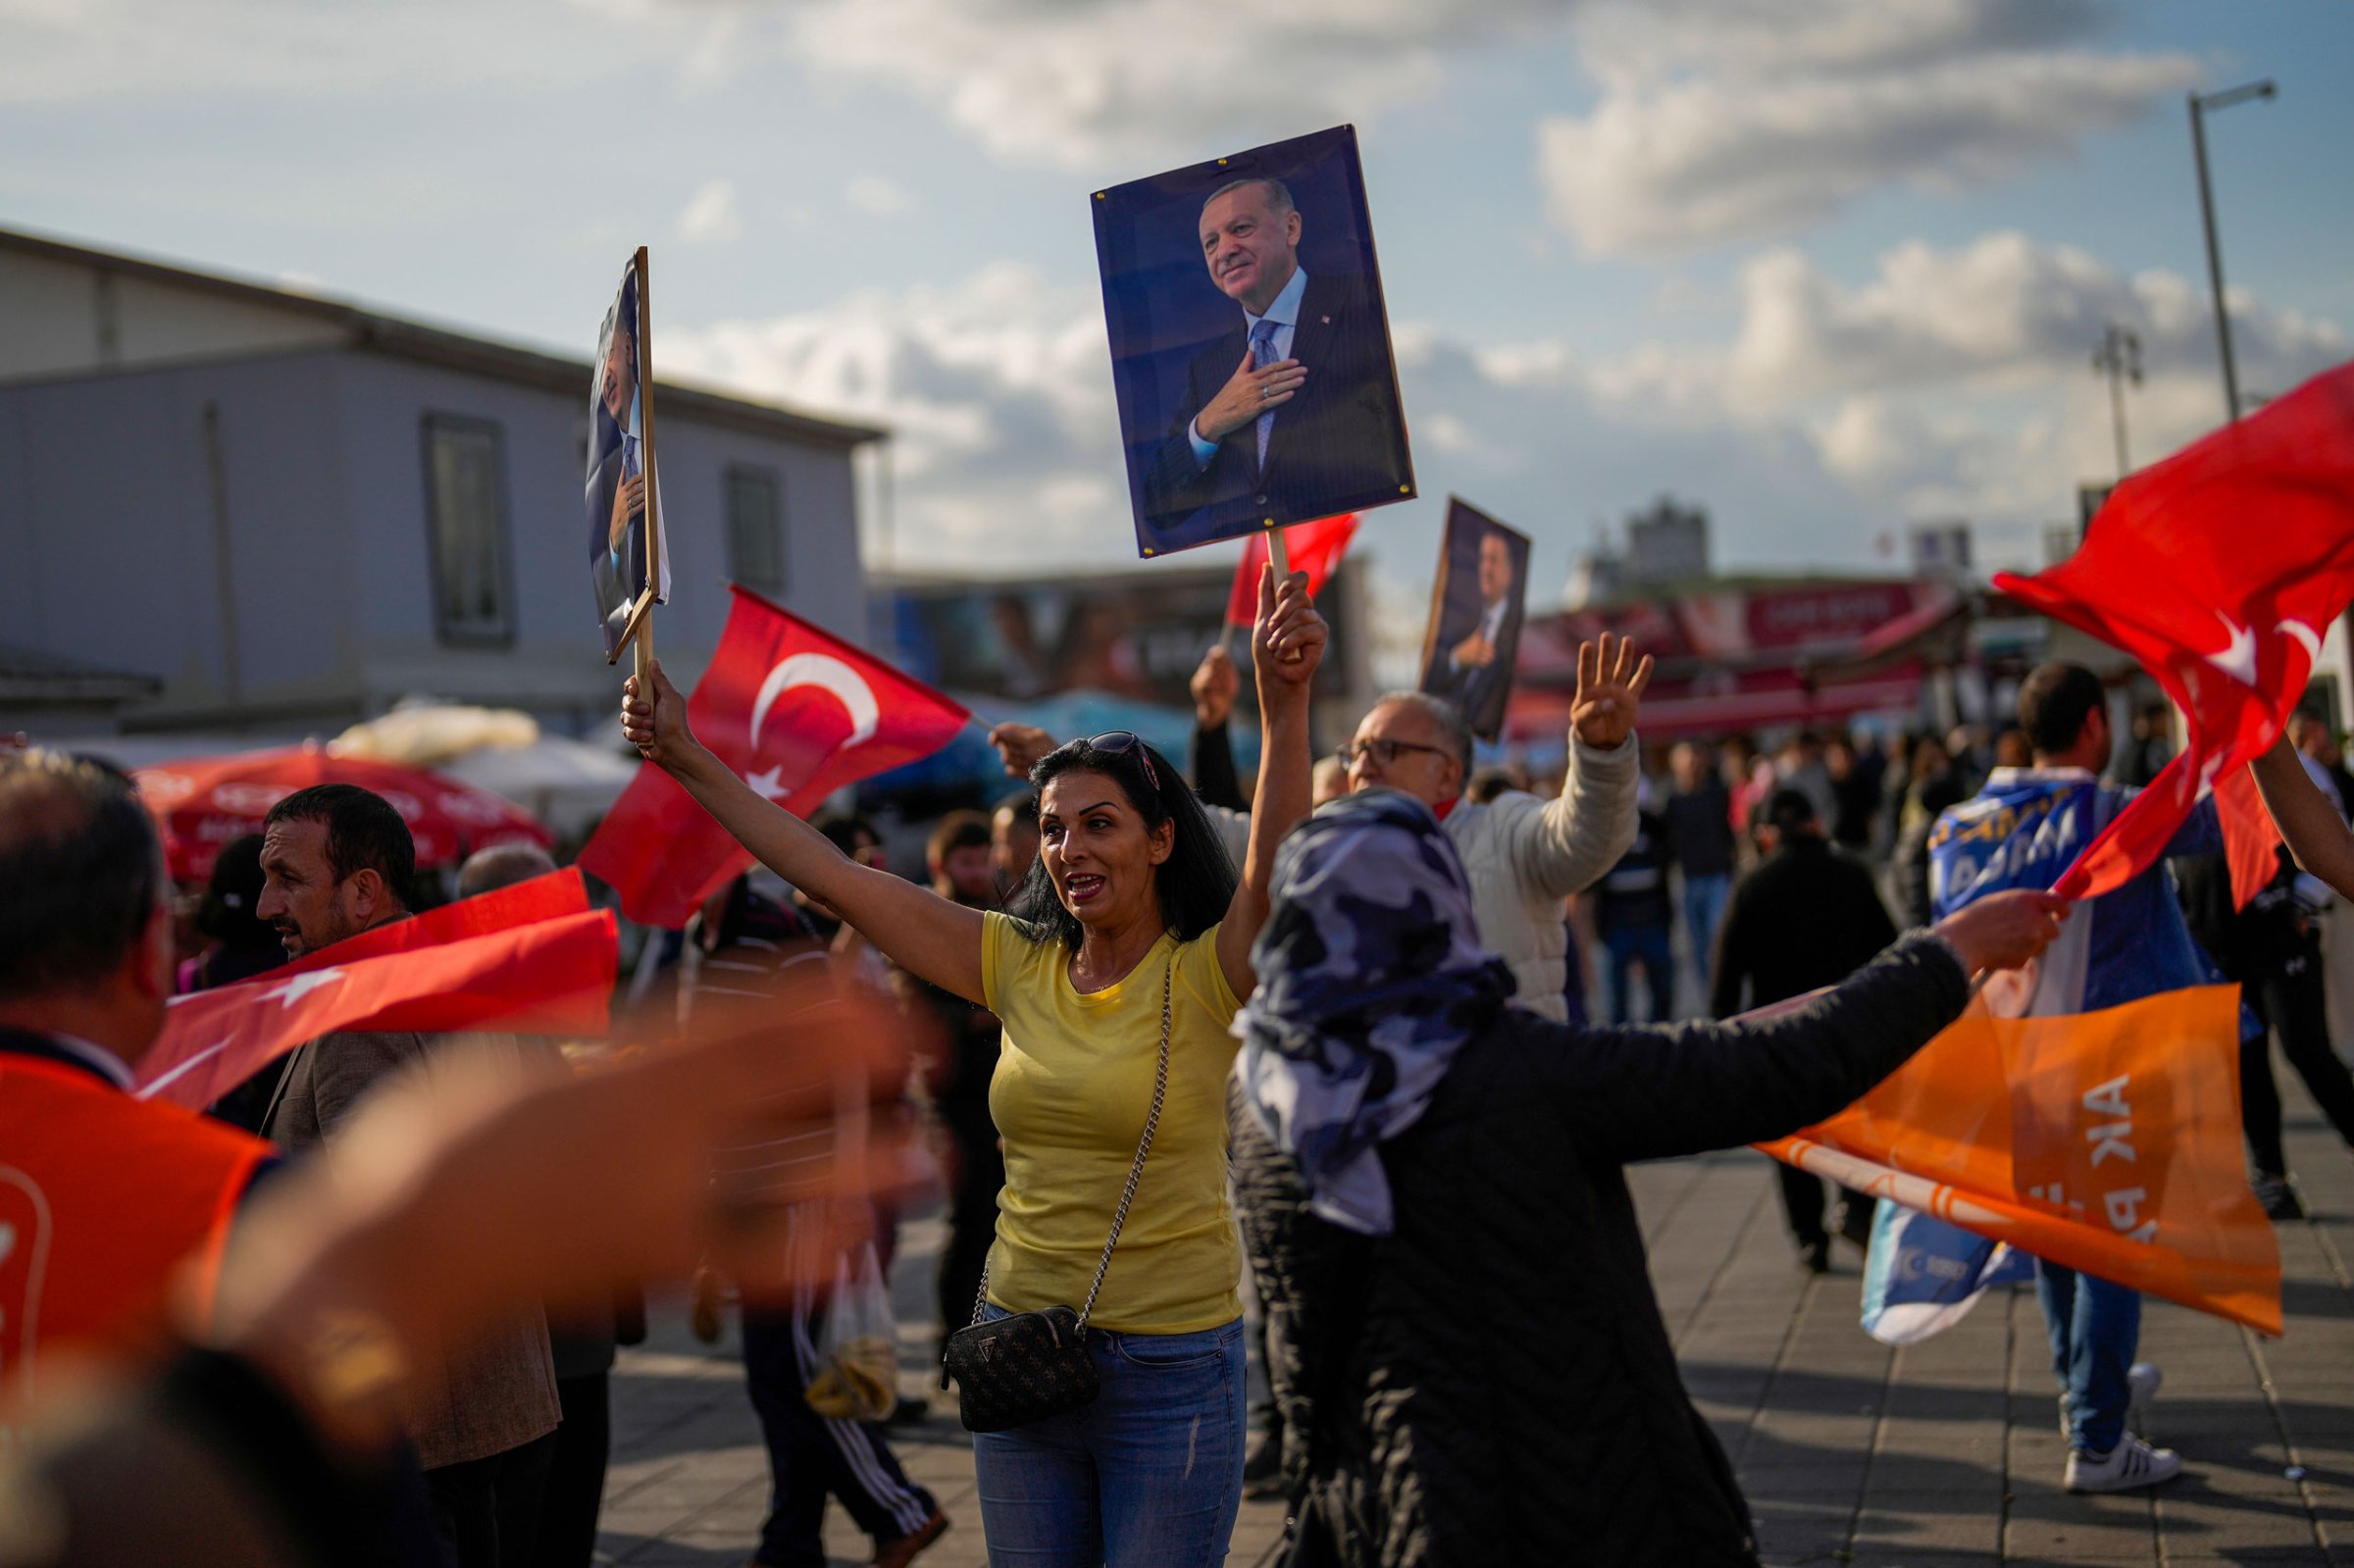 Supporters of Turkish President and People’s Alliance’s presidential candidate Recep Tayyip Erdogan dance as they give handouts to commuters in Istanbul